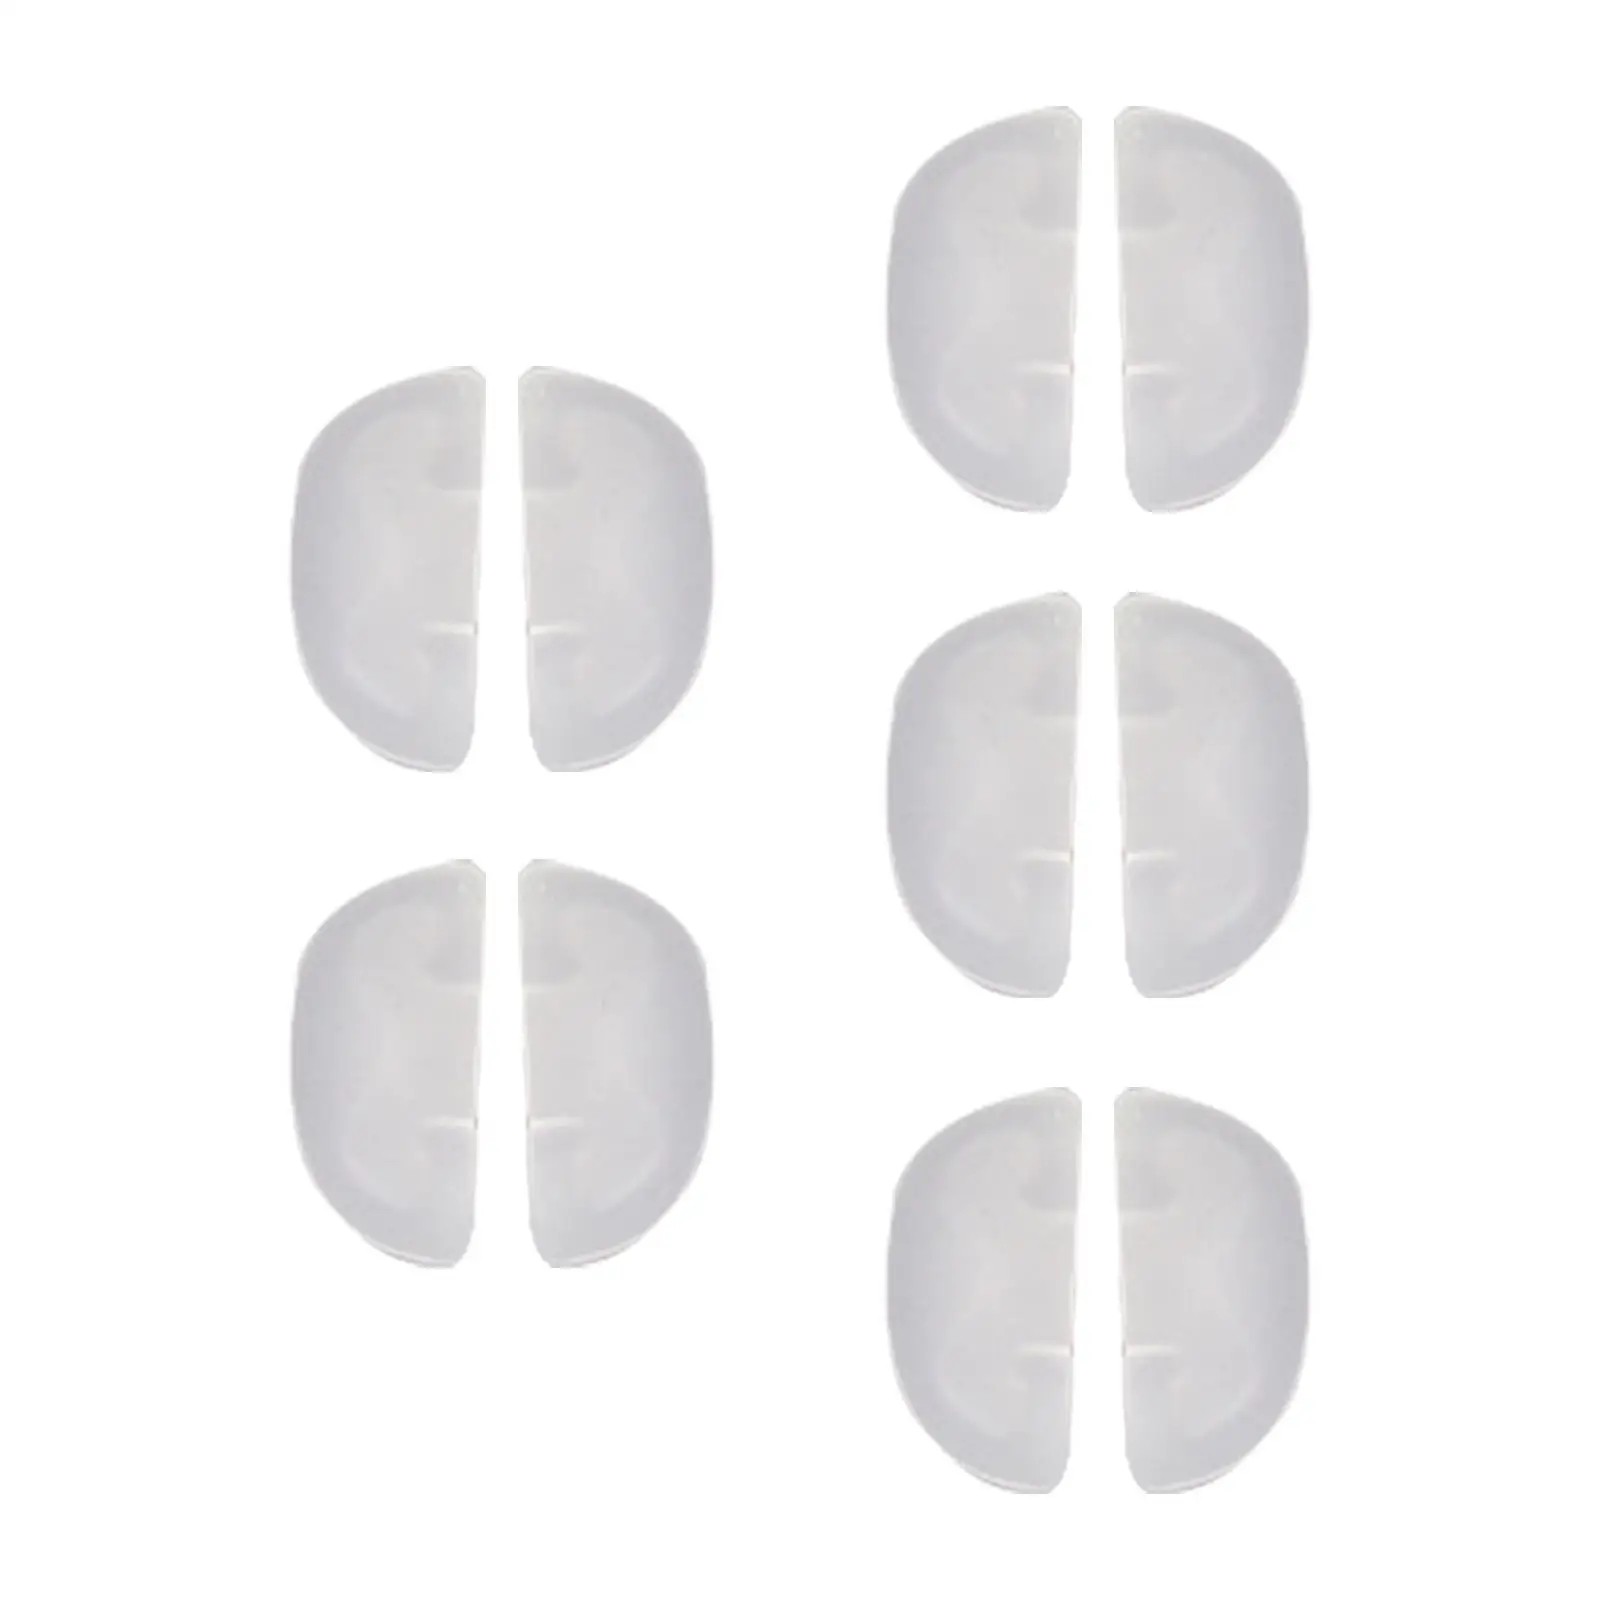 10x Children Eyeglass Nose Pads Replacement Contoured Soft for Sunglasses